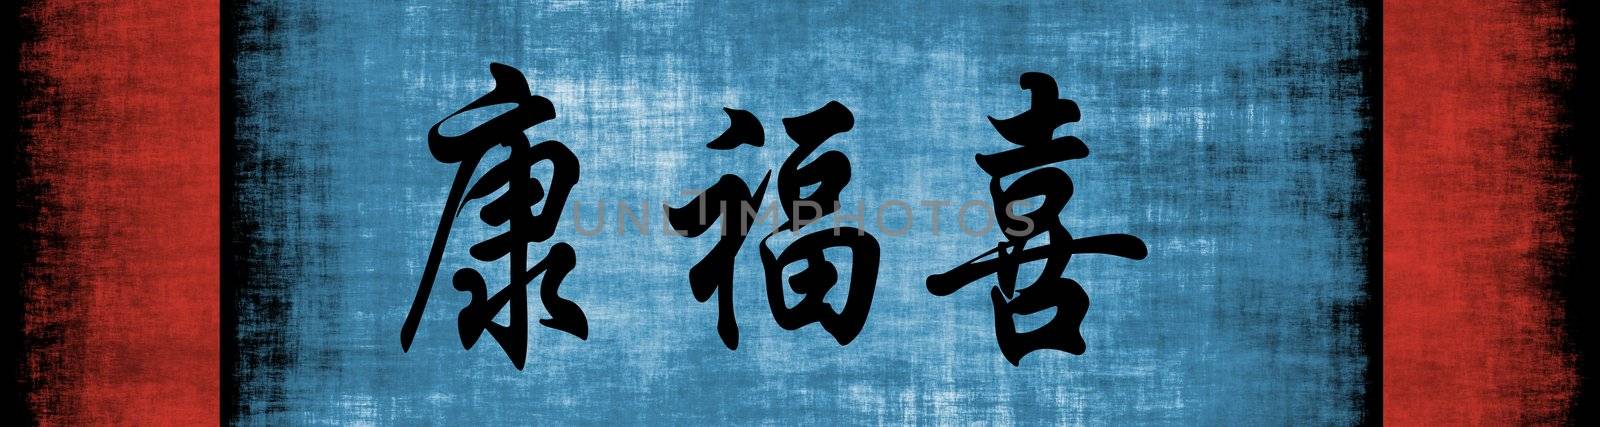 Health Wealth Happiness Chinese Motivational Phrase by kentoh